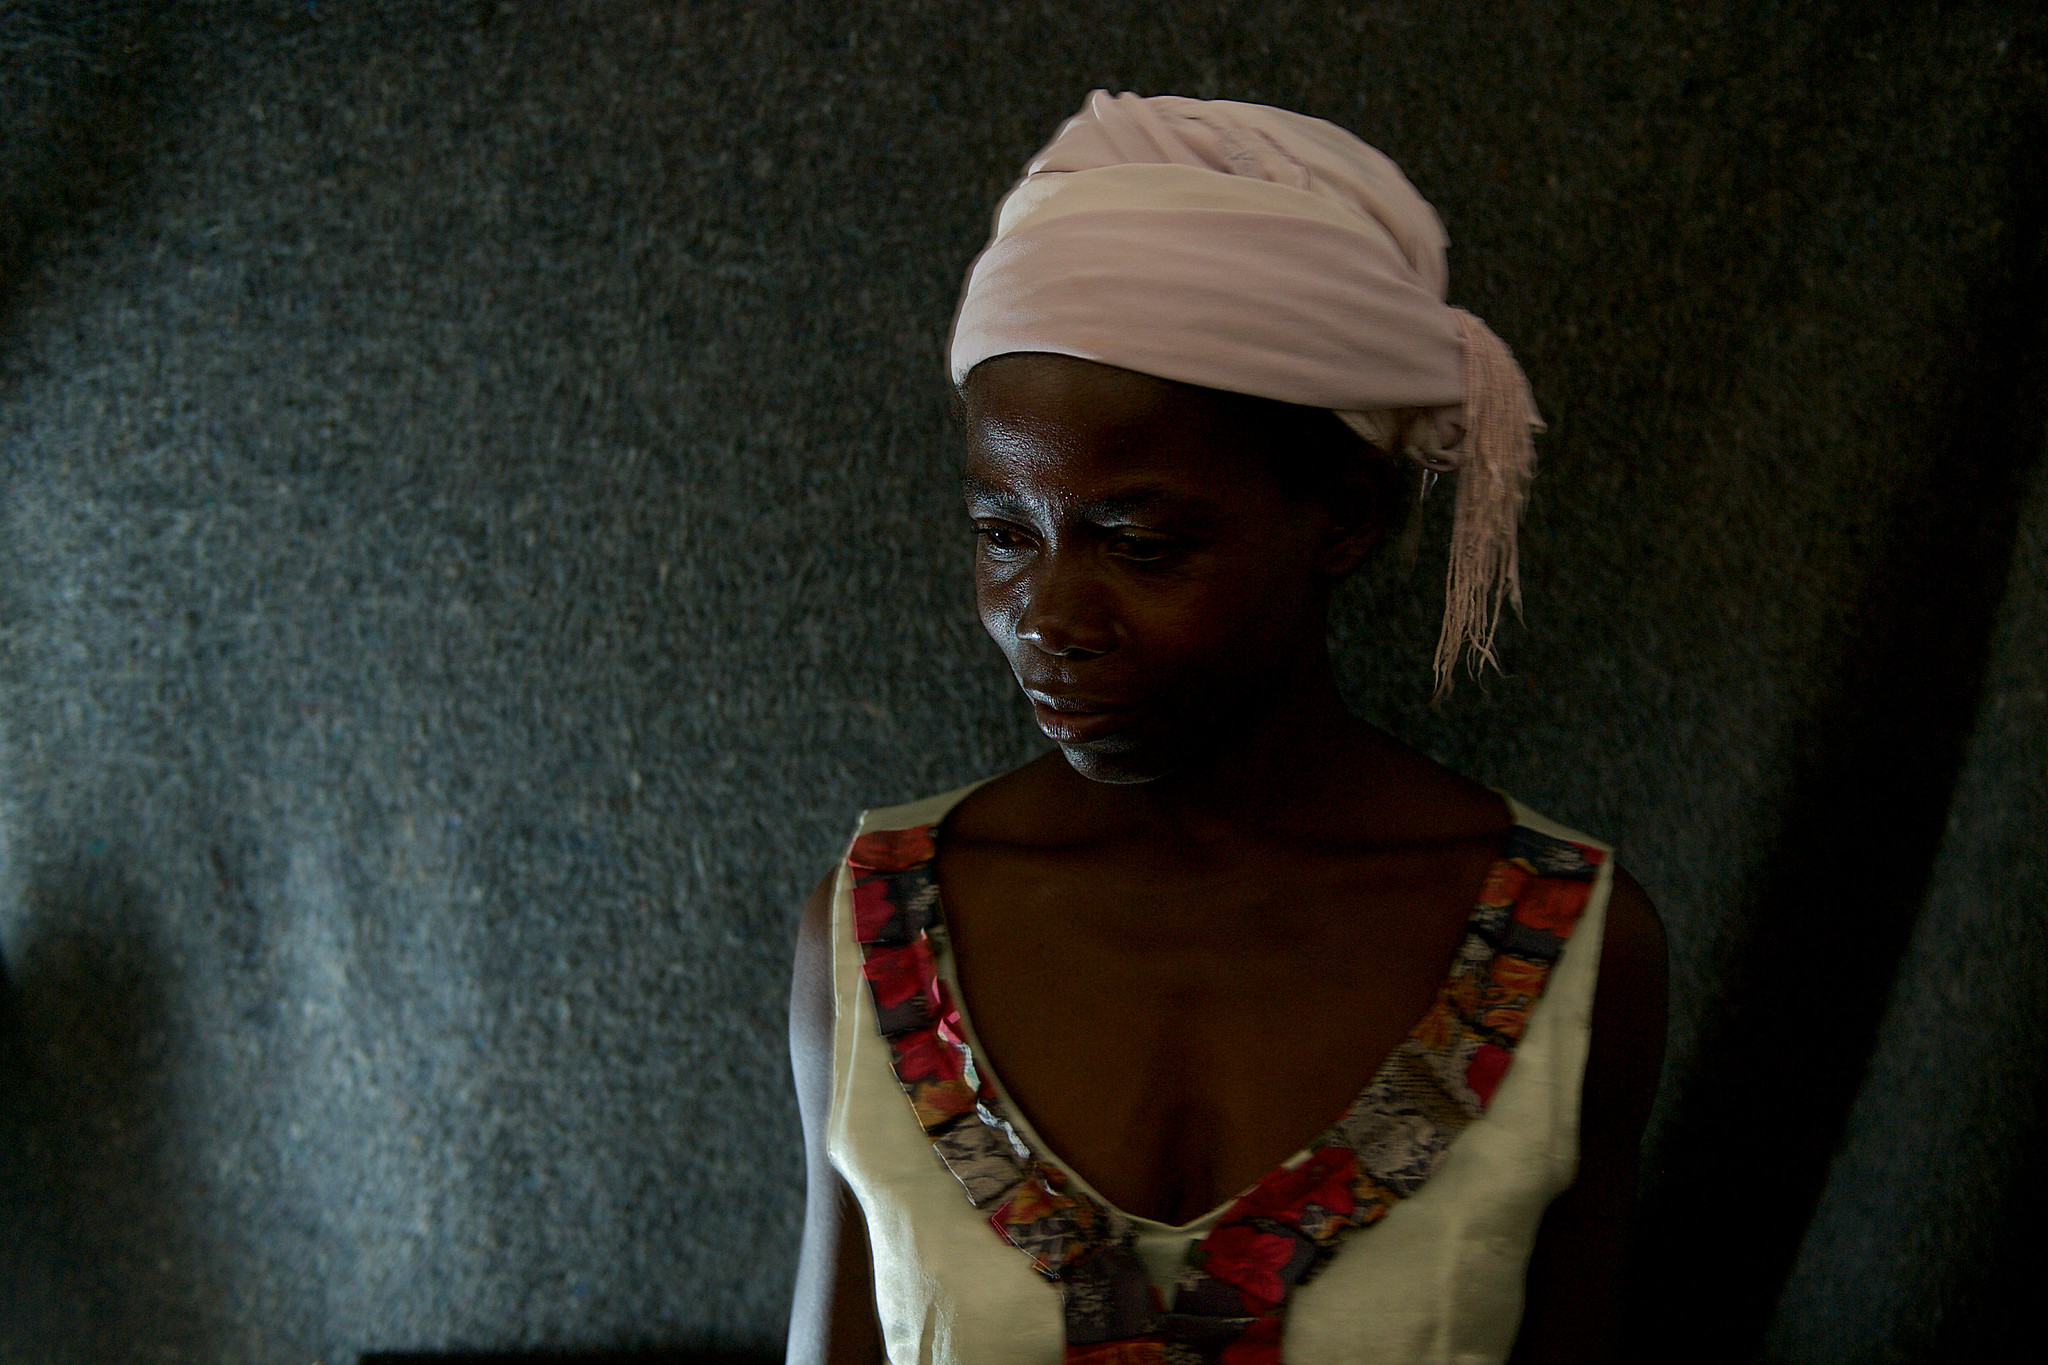 A portrait of a woman from DRC who has received support after fleeing gender based violence